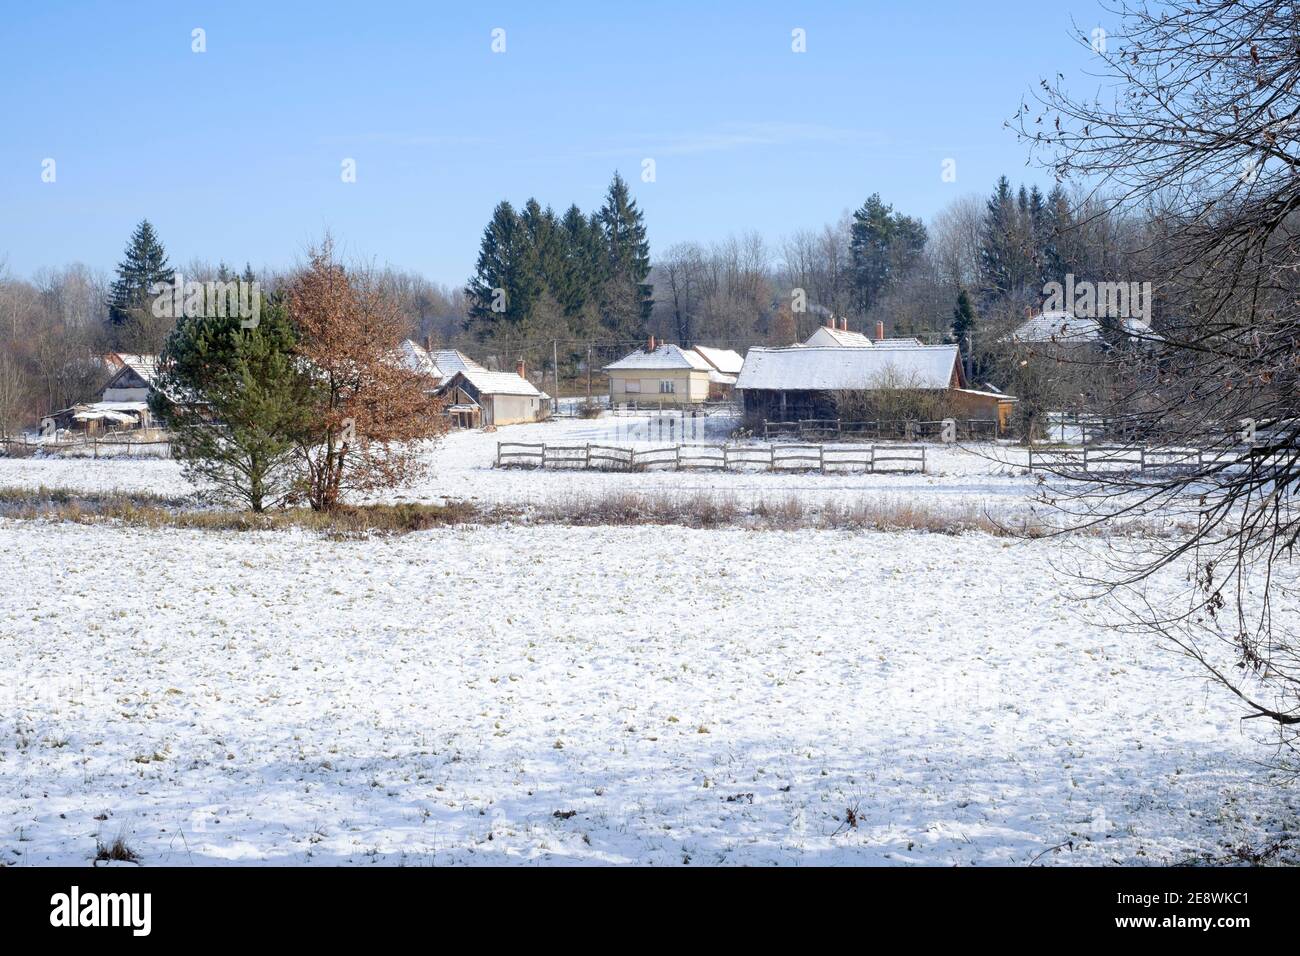 typical small rural hamlet in the countryside during winter zala county hungary Stock Photo